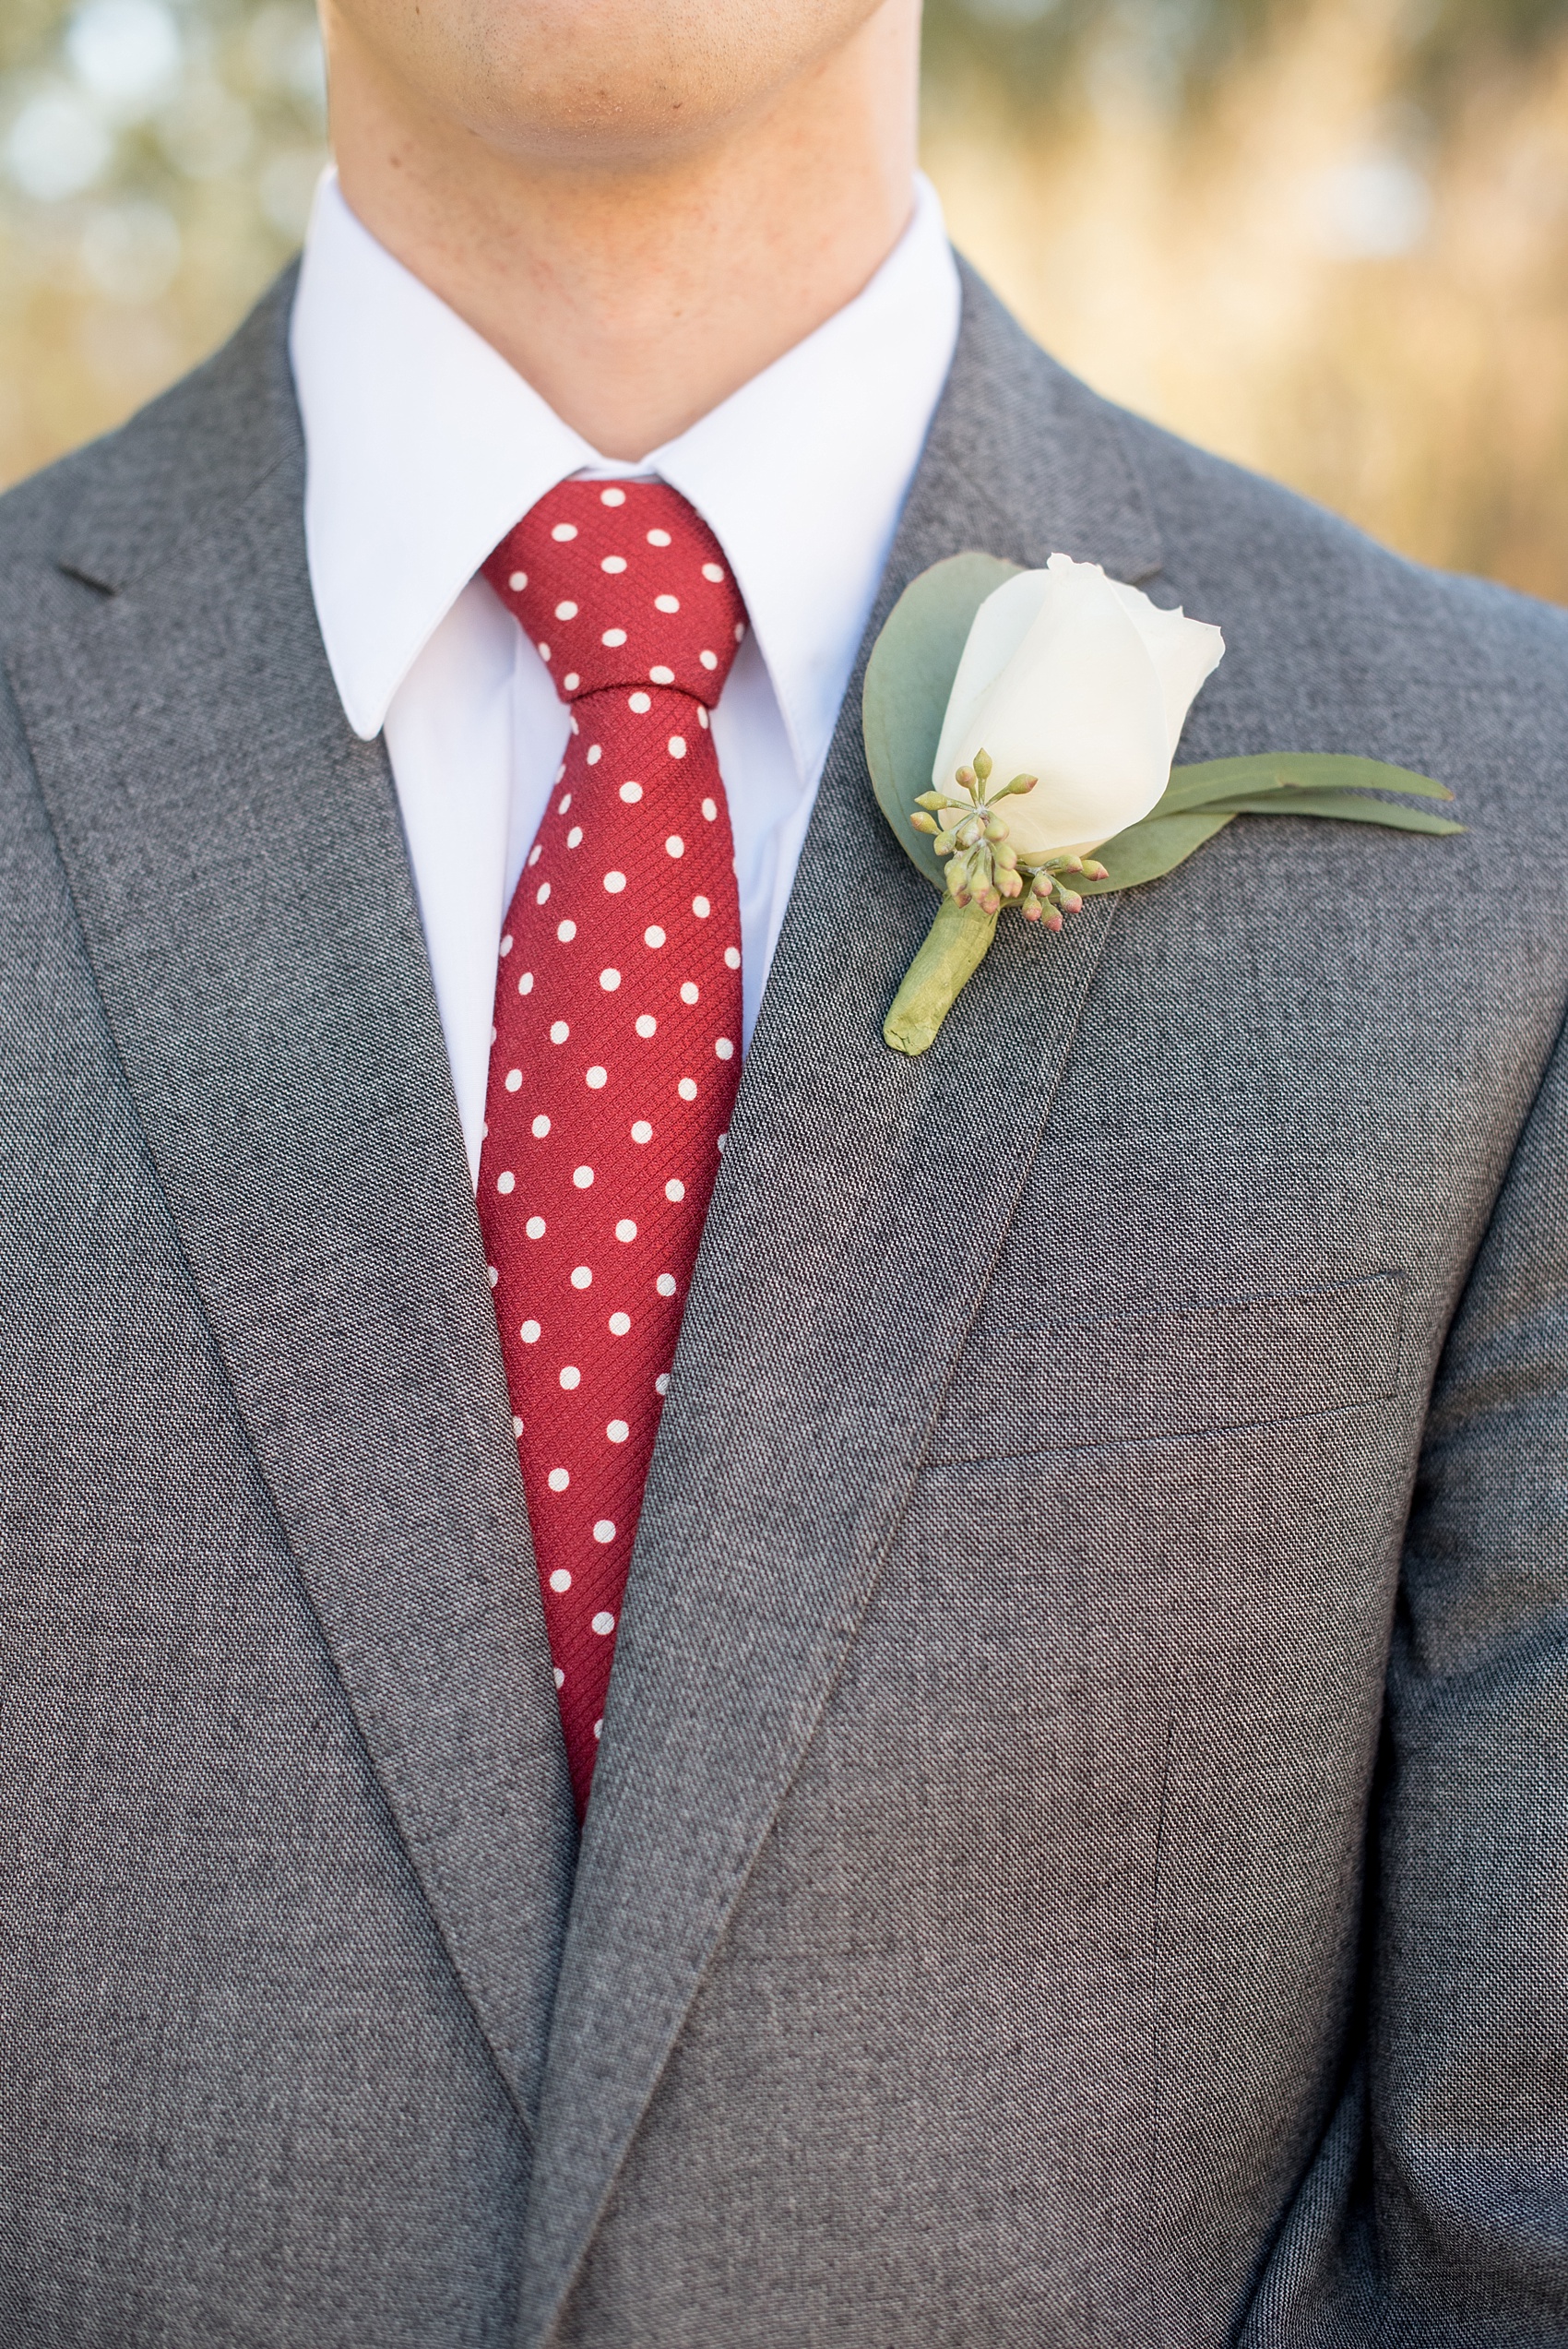 Mikkel Paige Photography photo of a wedding at The Rickhouse, Durham. The best man and groomsman wore a red and white polka dot tie and grey suit with a rose boutonniere.